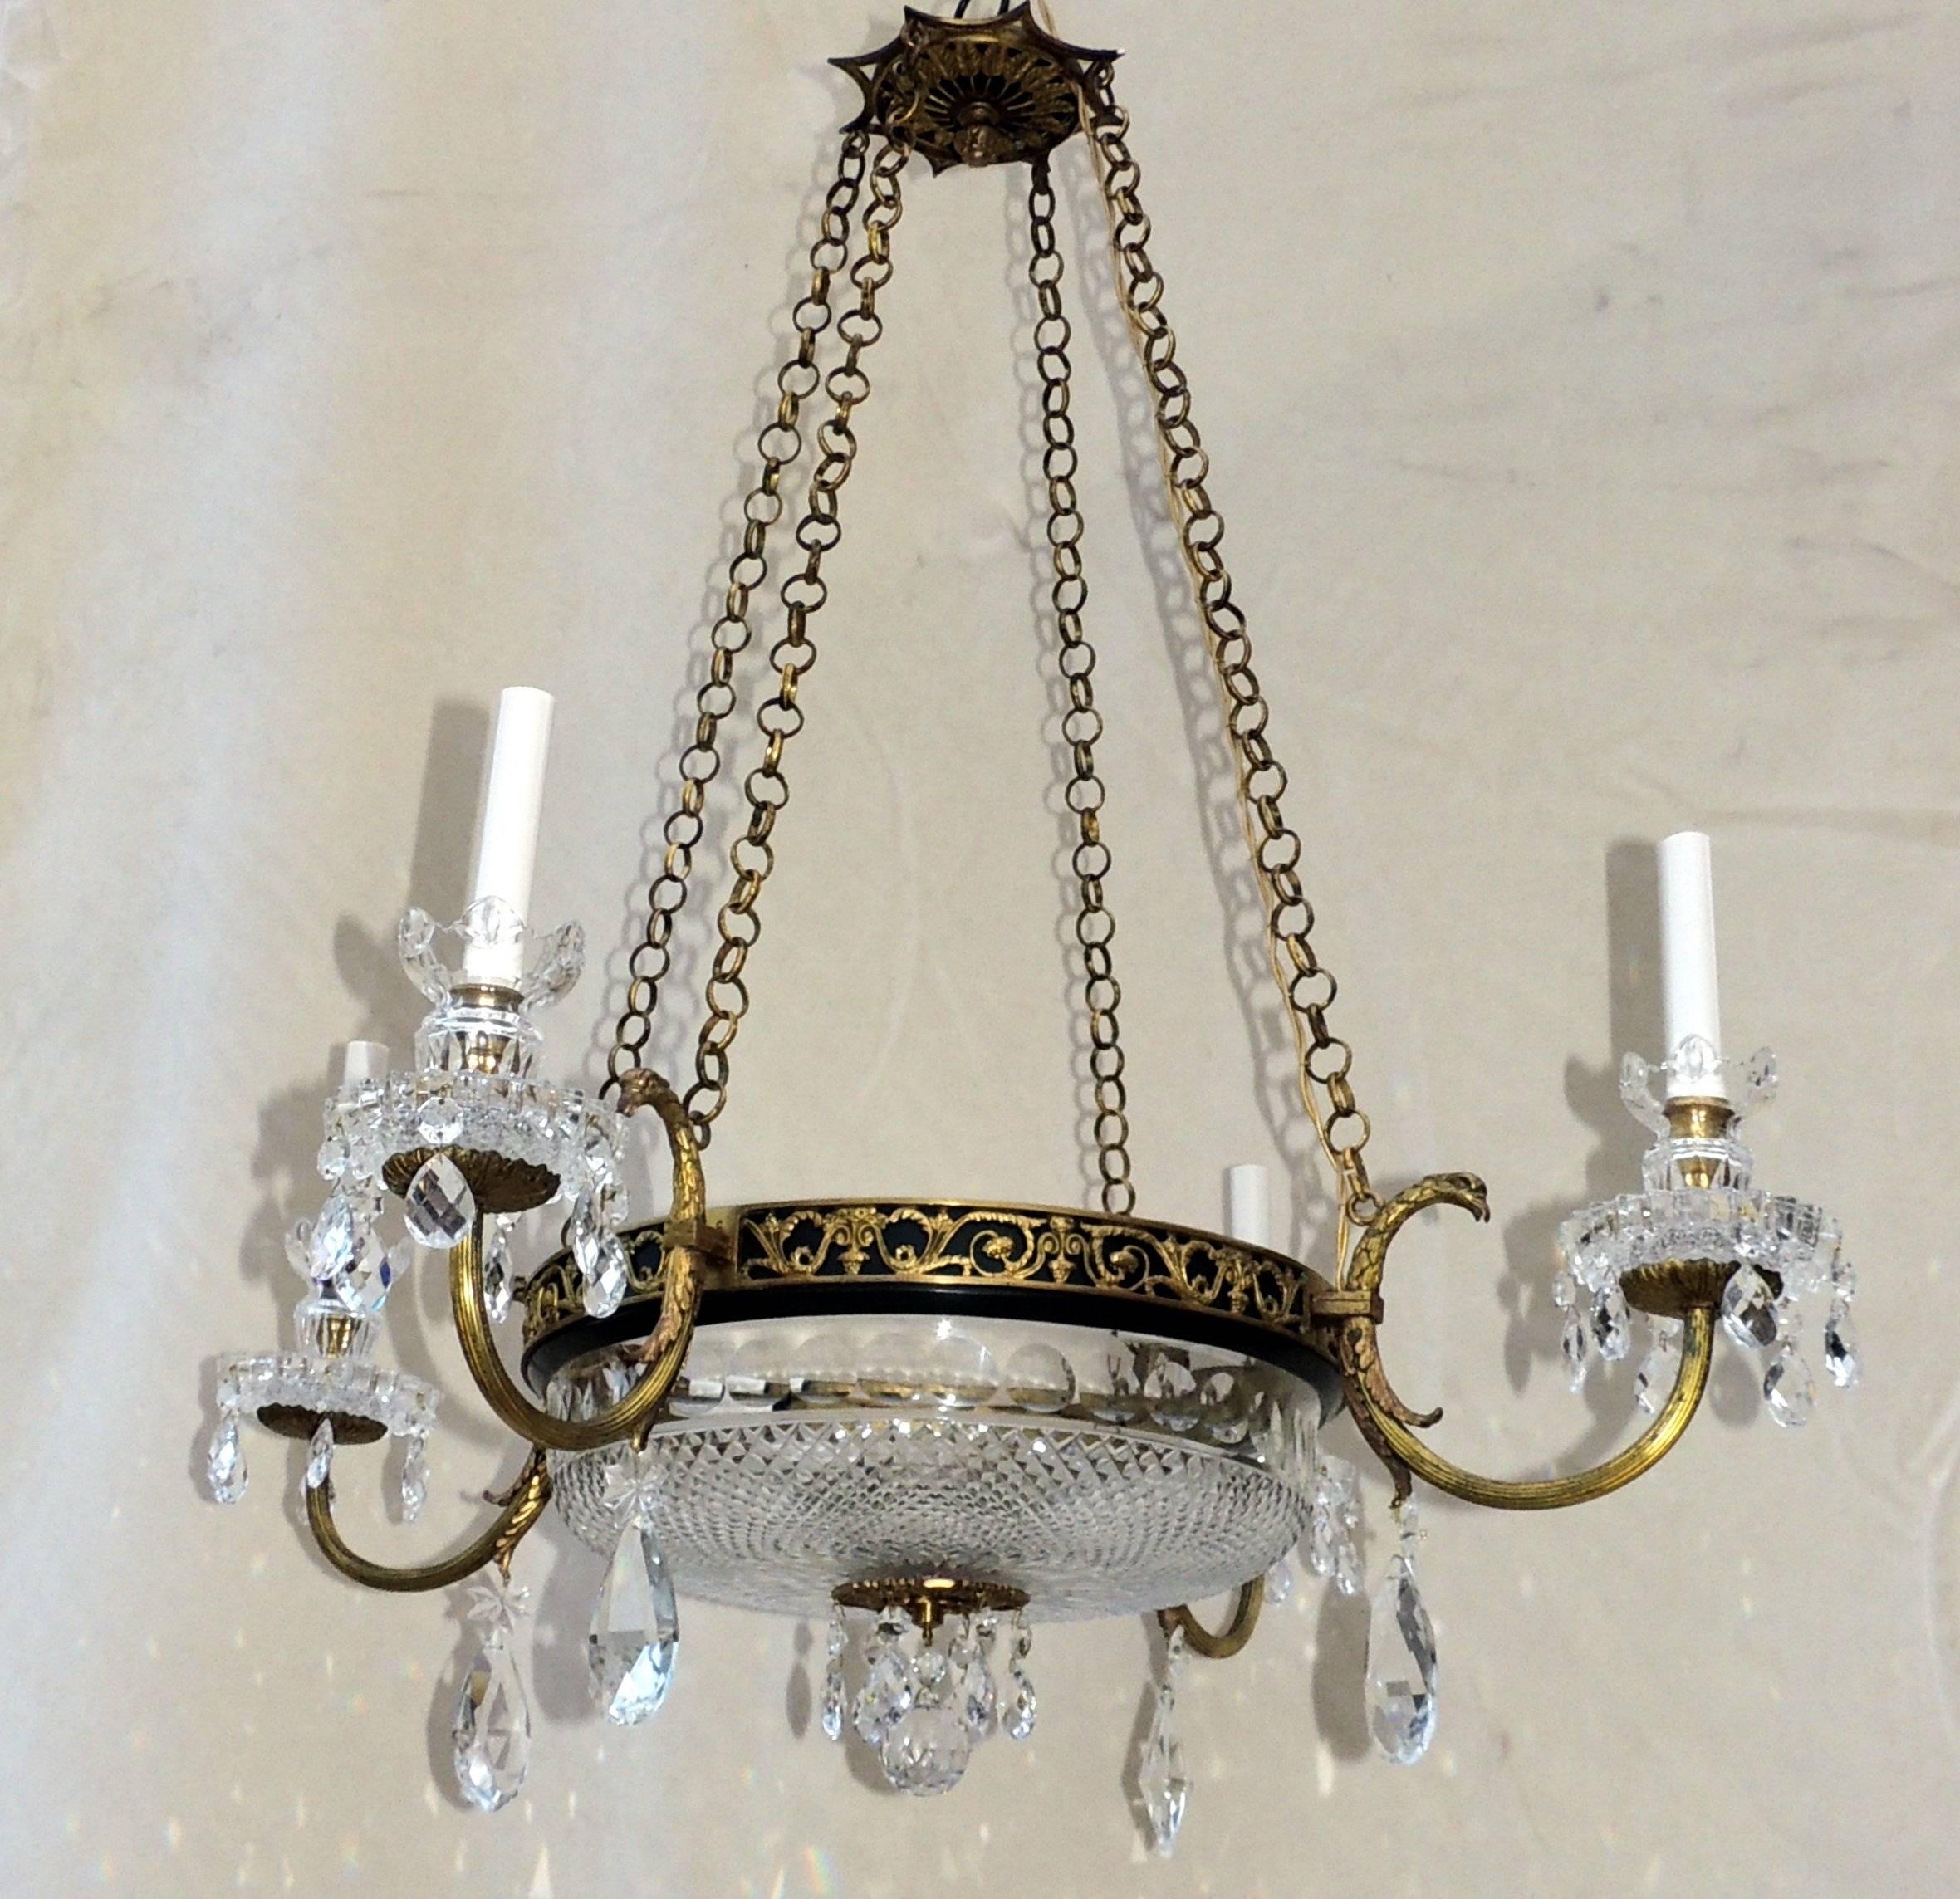 Elegant French Empire Bronze Patinated and Crystal Neoclassical Chandelier For Sale 3